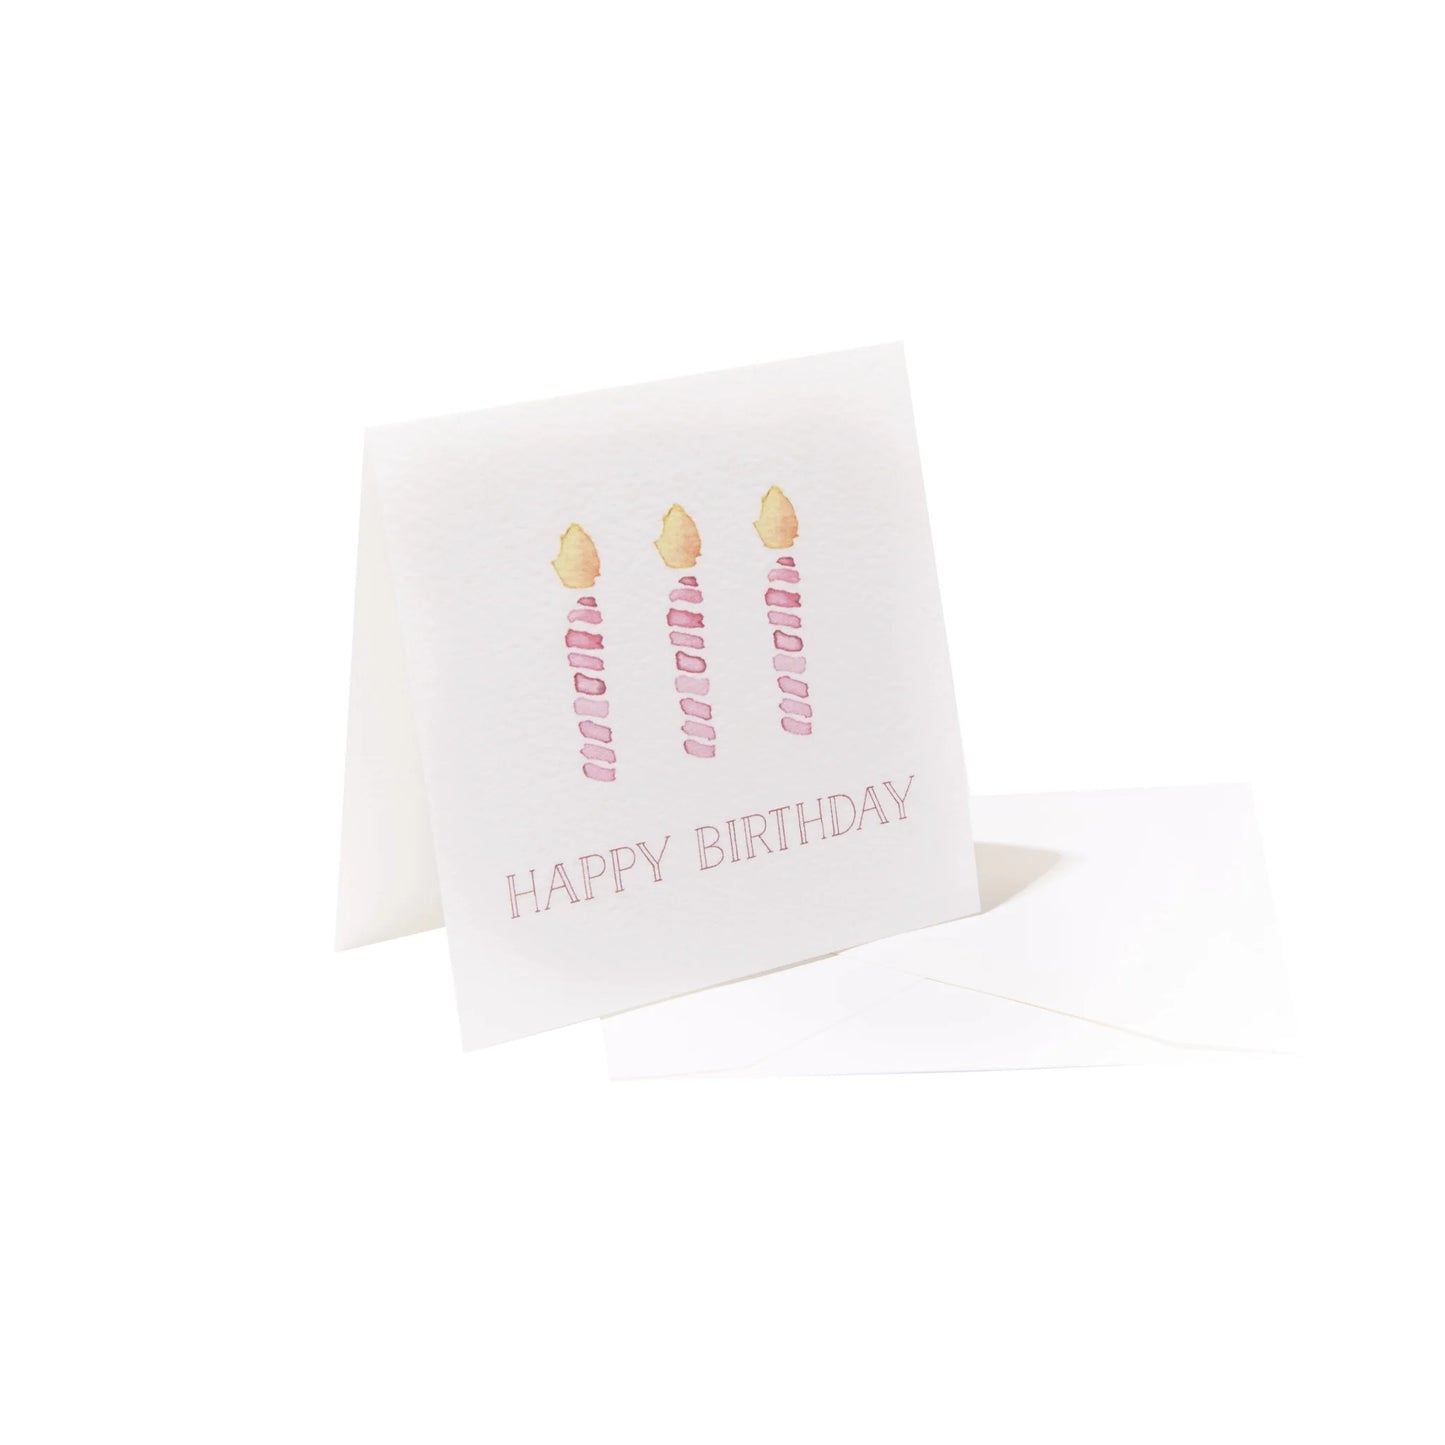 "Happy Birthday" Pink Candles Enclosure Cards